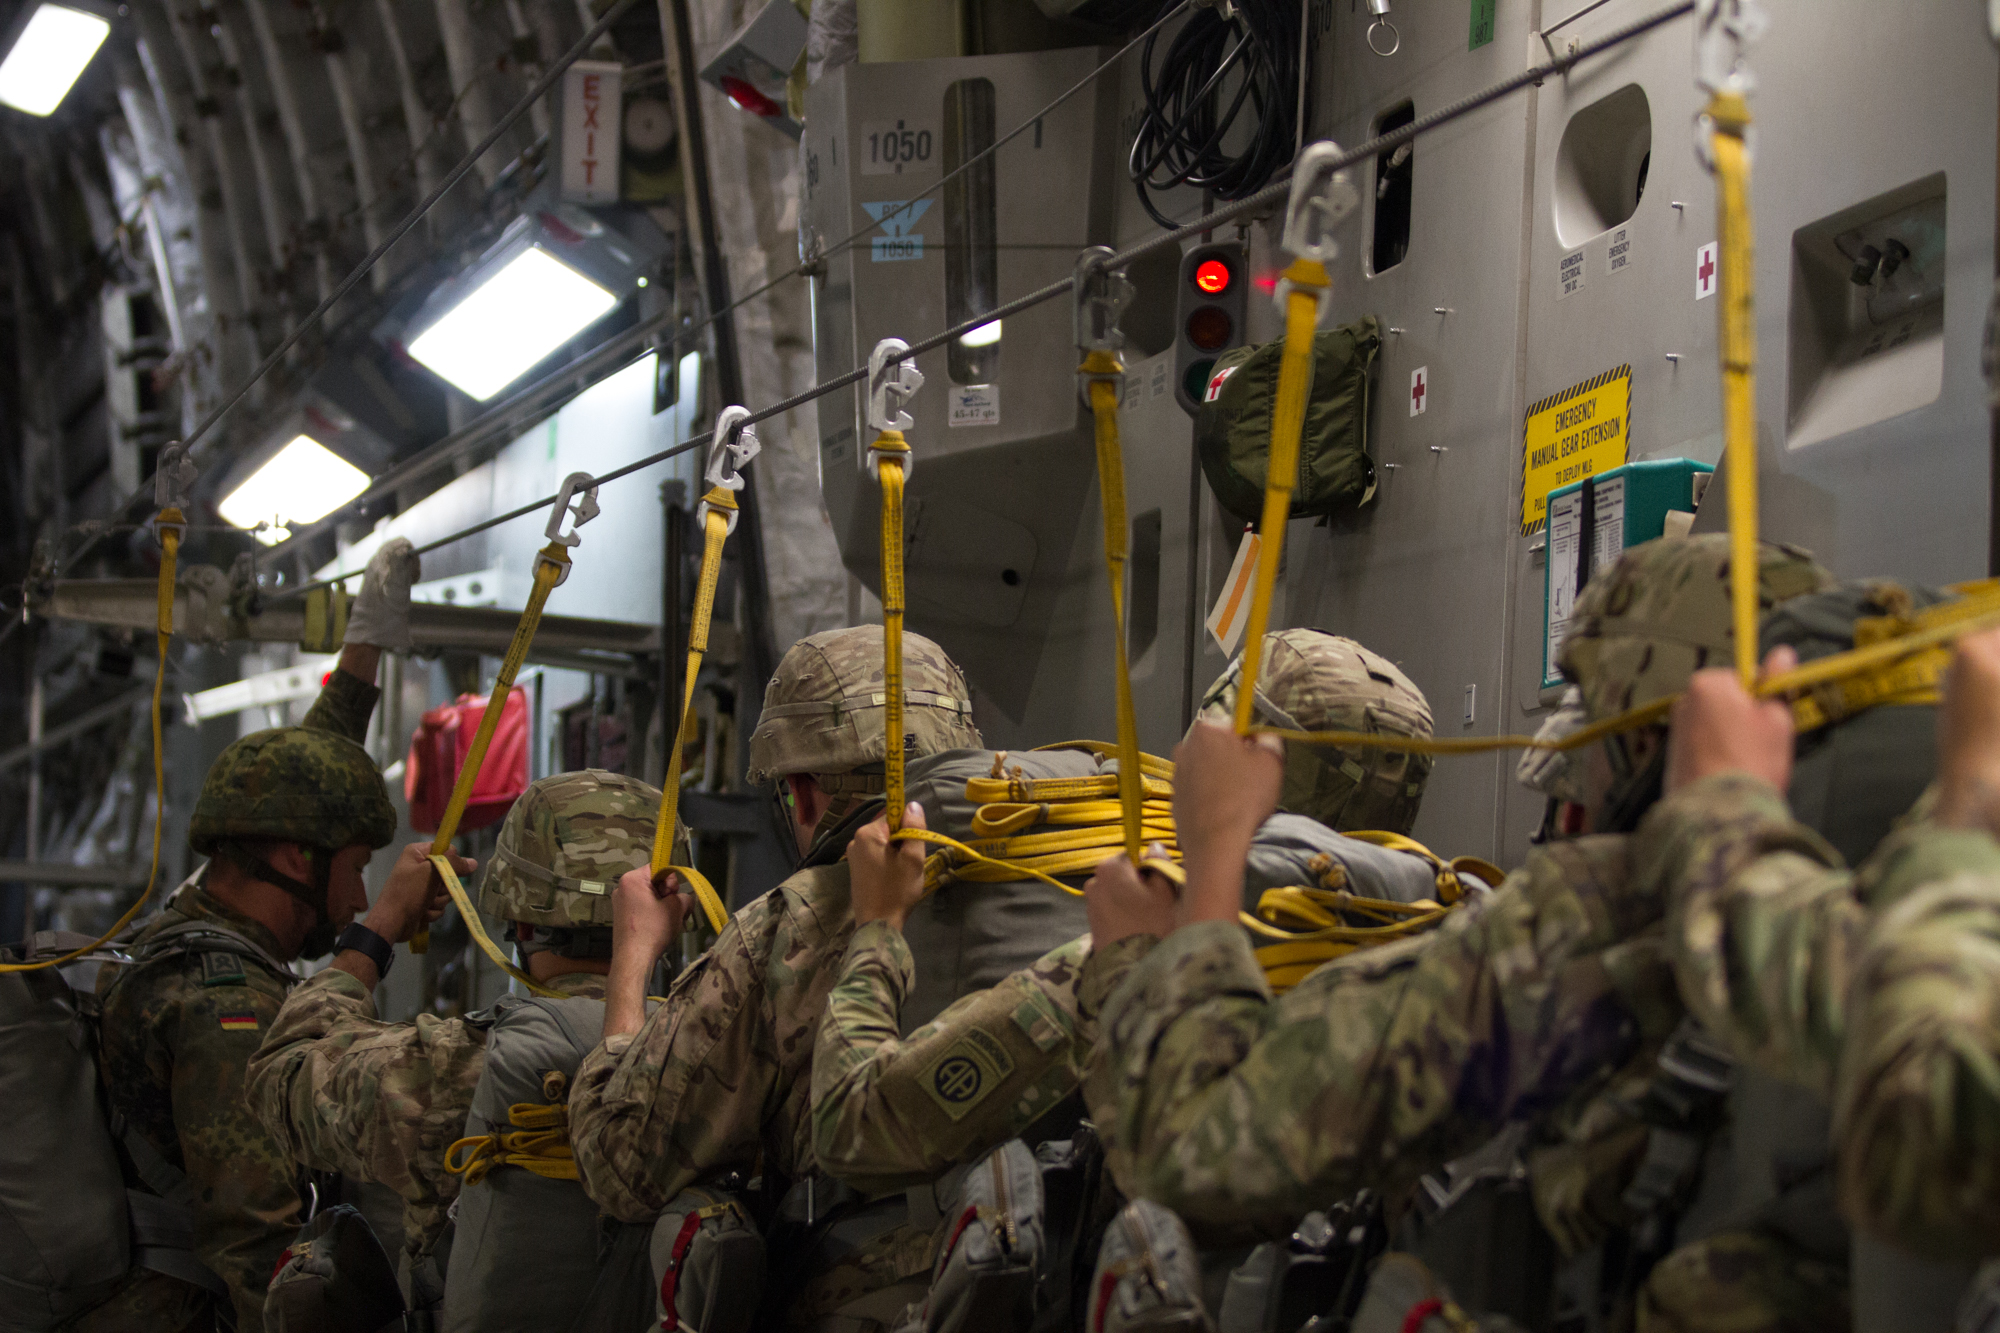  Paratroopers with the 82nd Airborne Division walk towards the jump door during a training jump at Fort Bragg, N.C. on July 26, 2017. 